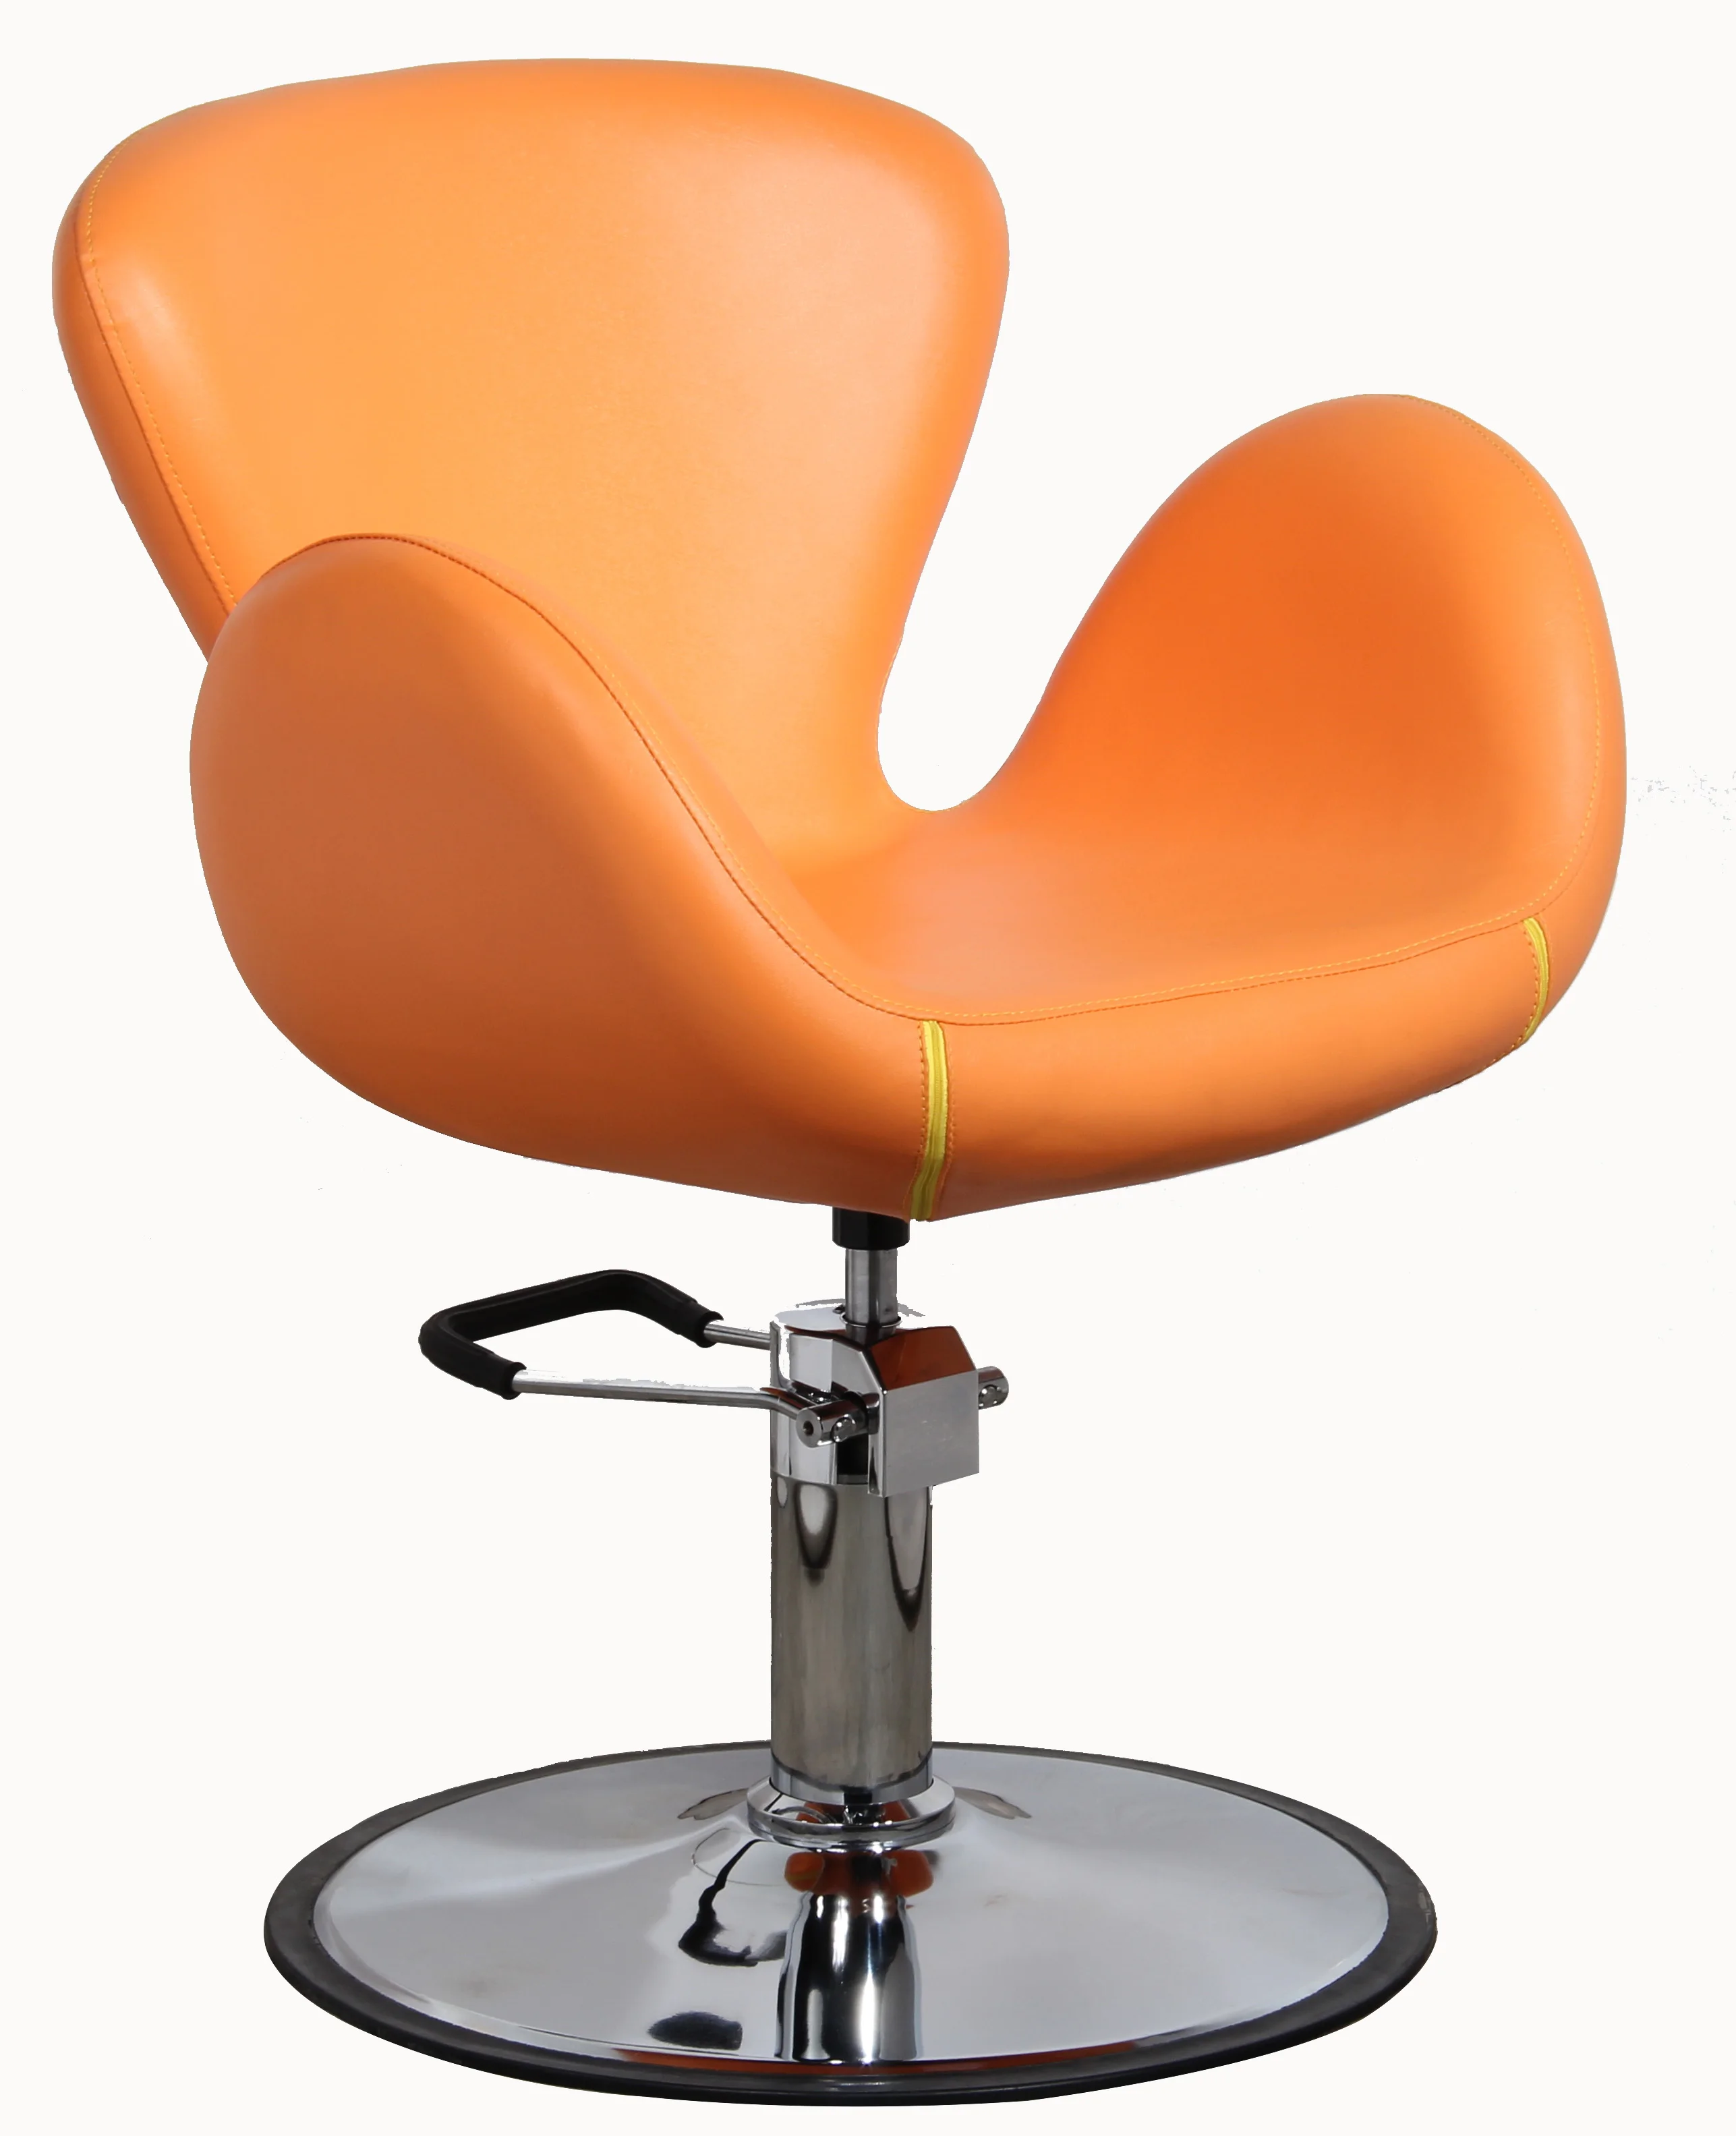 
Hot Geared Raising Leather Styling Chair Salon Barber Orange Pink  (60825190582)